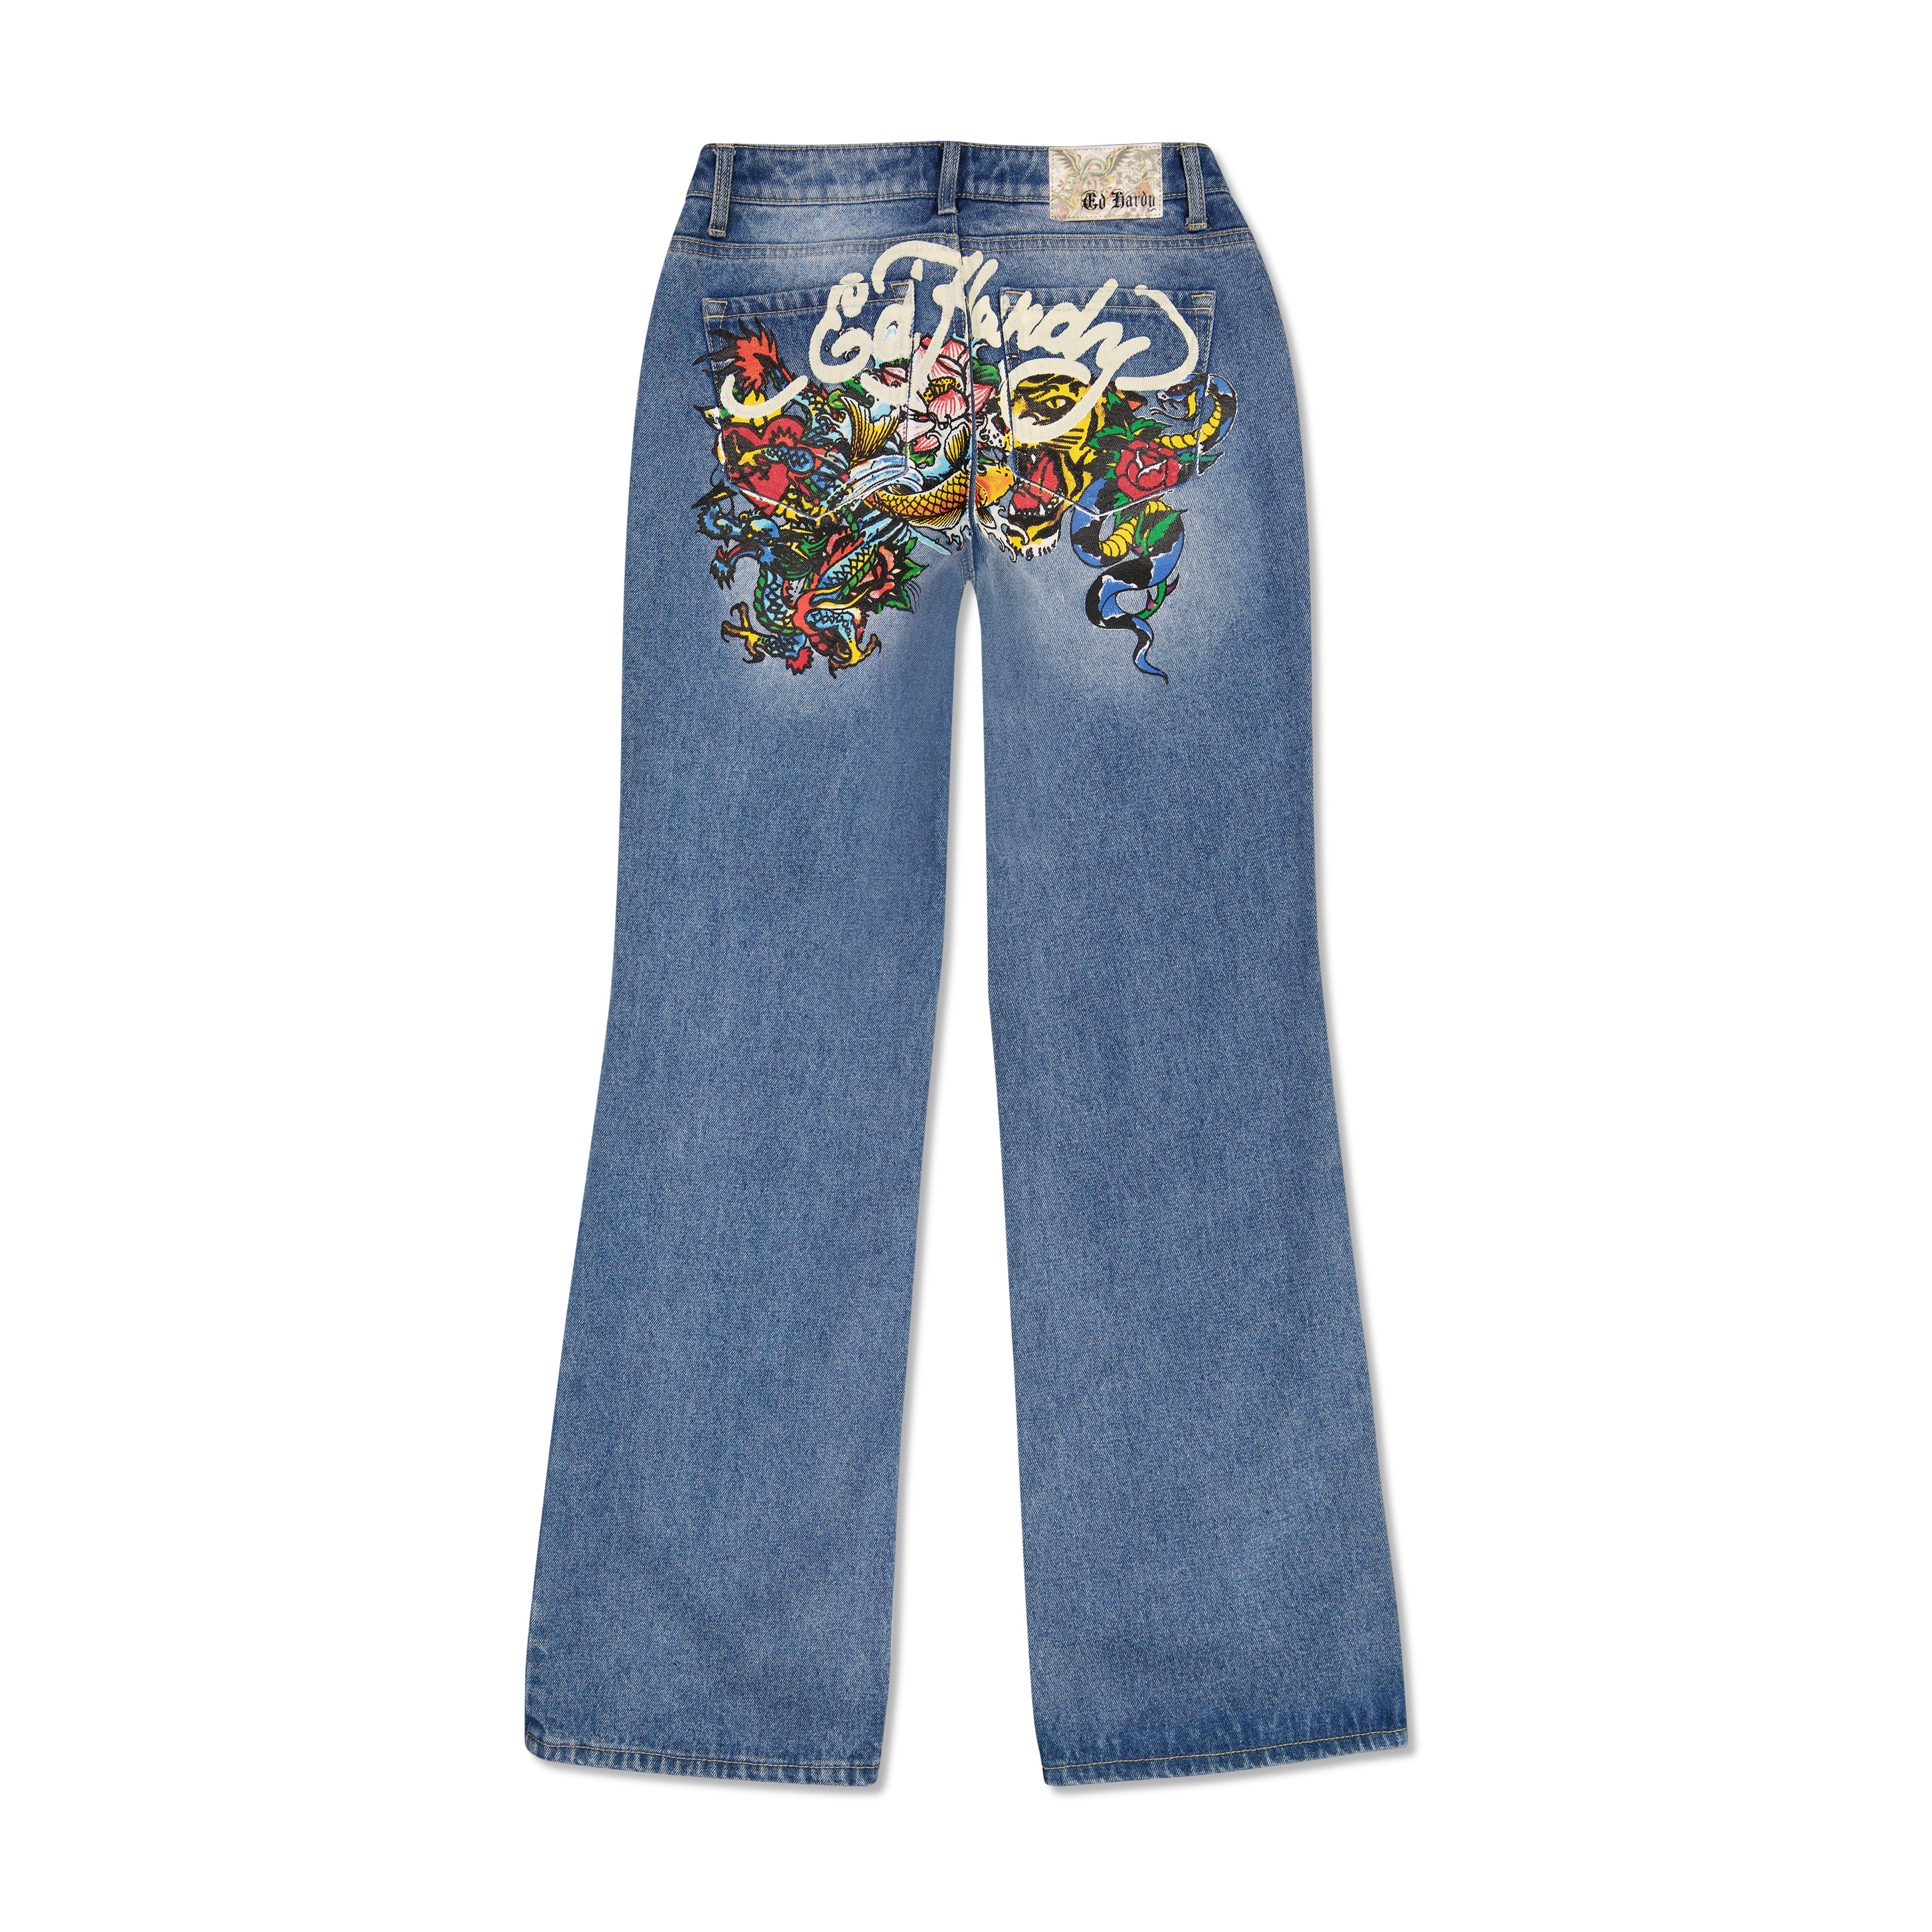 Buy ED HARDY Mens 3 Pocket Printed Joggers | Shoppers Stop